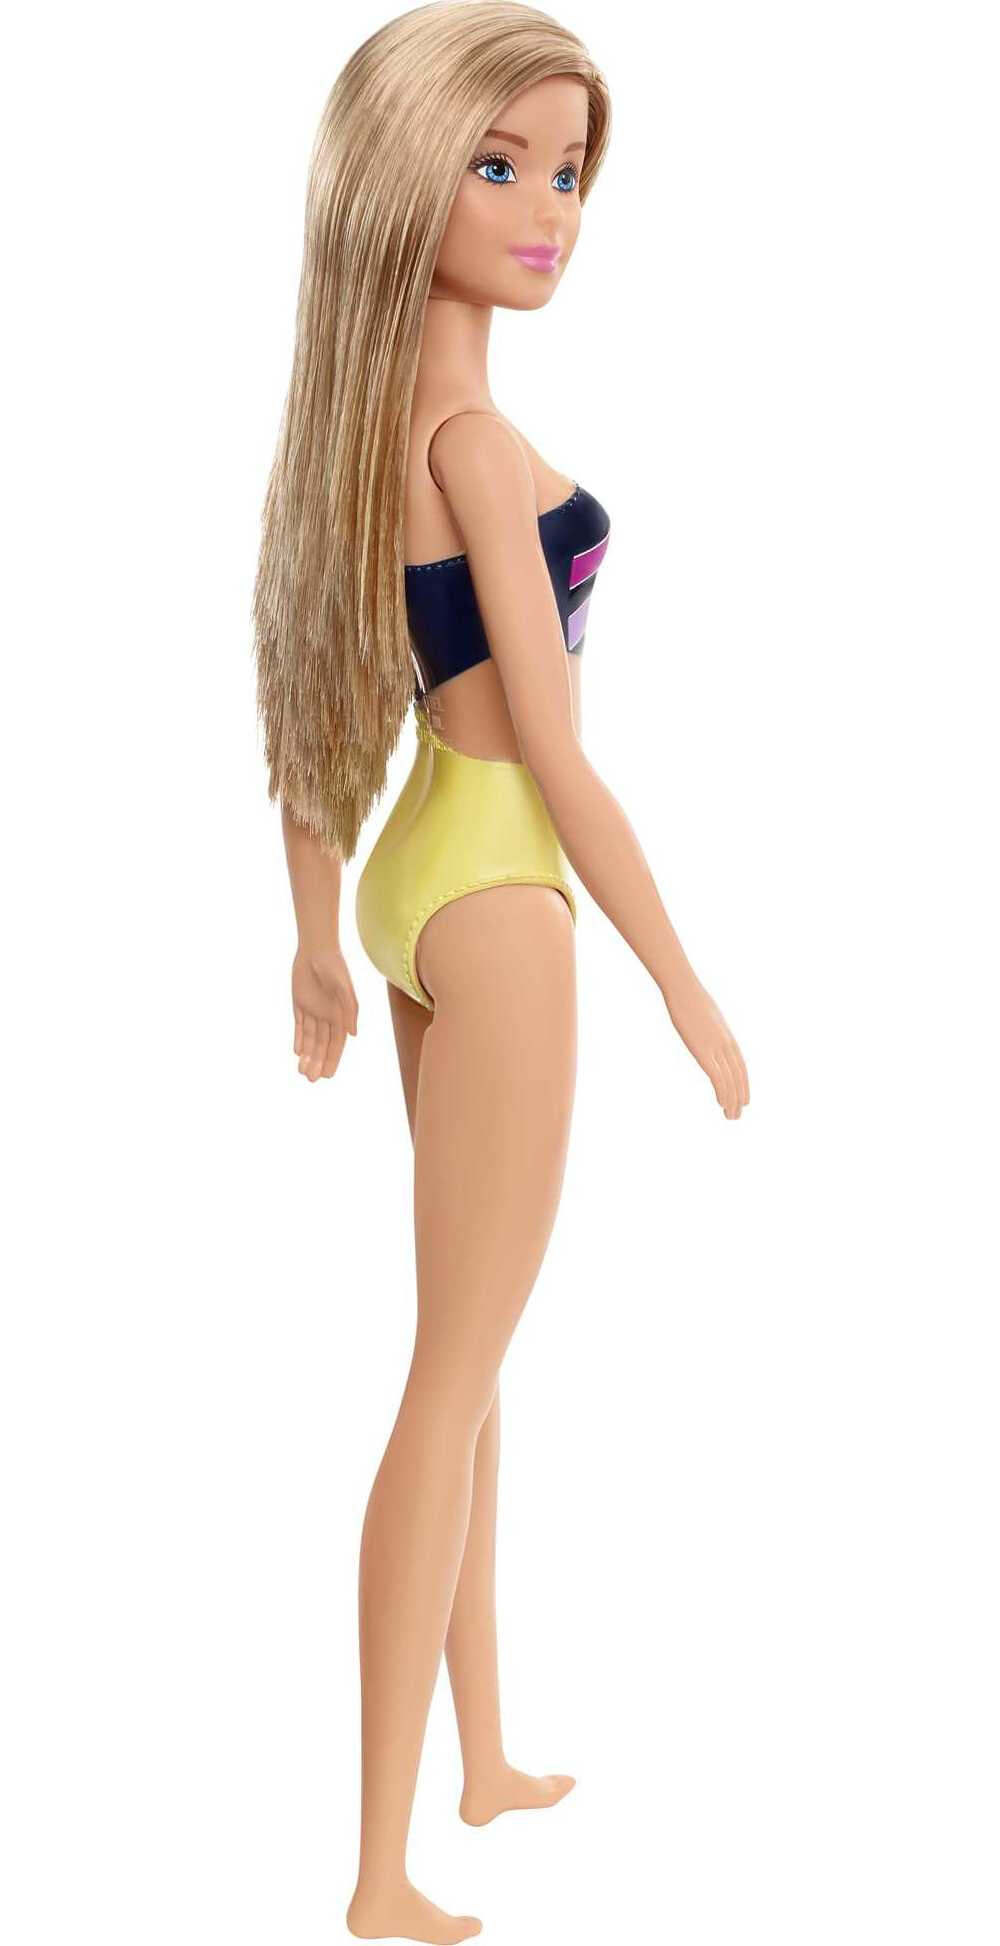 Barbie Swimsuit Beach Doll with Blonde Hair & Striped Suit - image 4 of 6